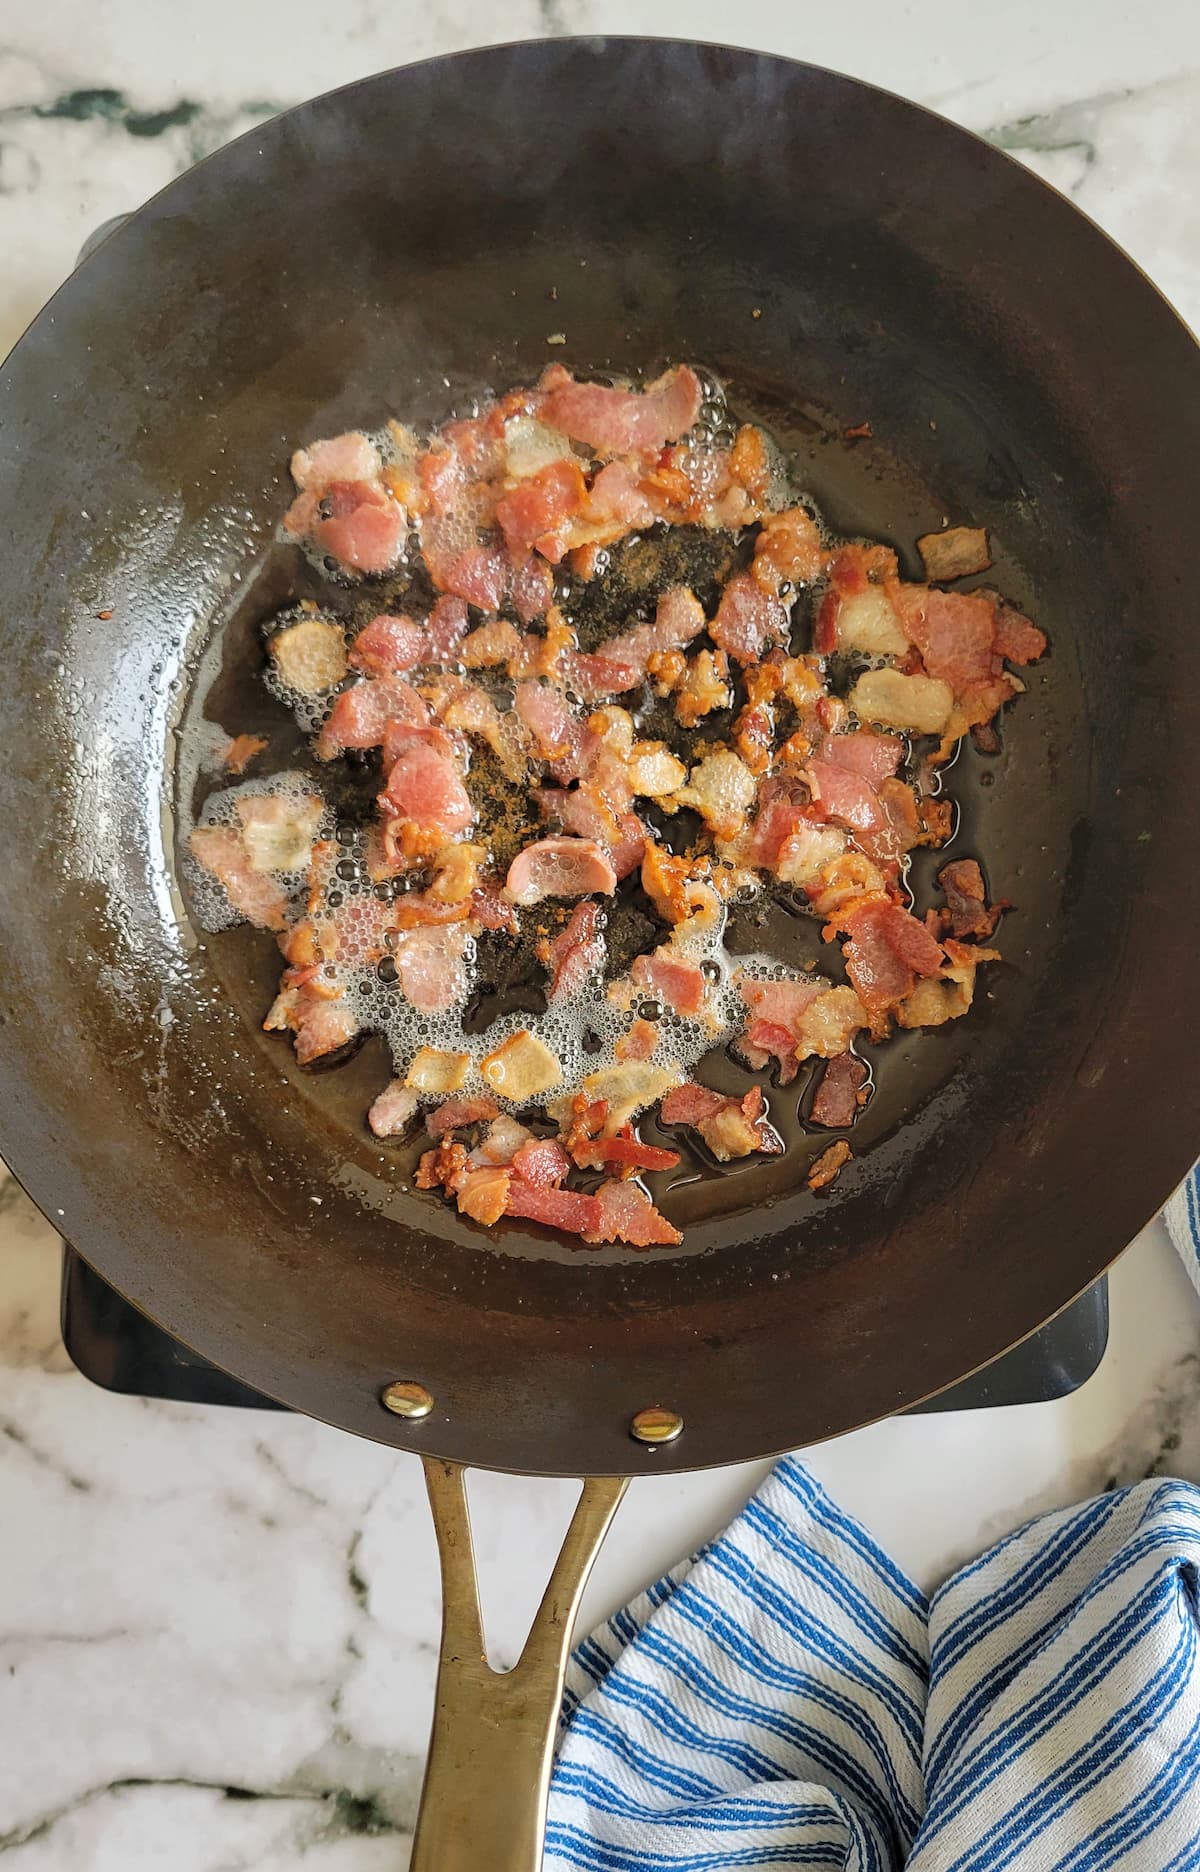 crumbled bacon cooking in a skillet